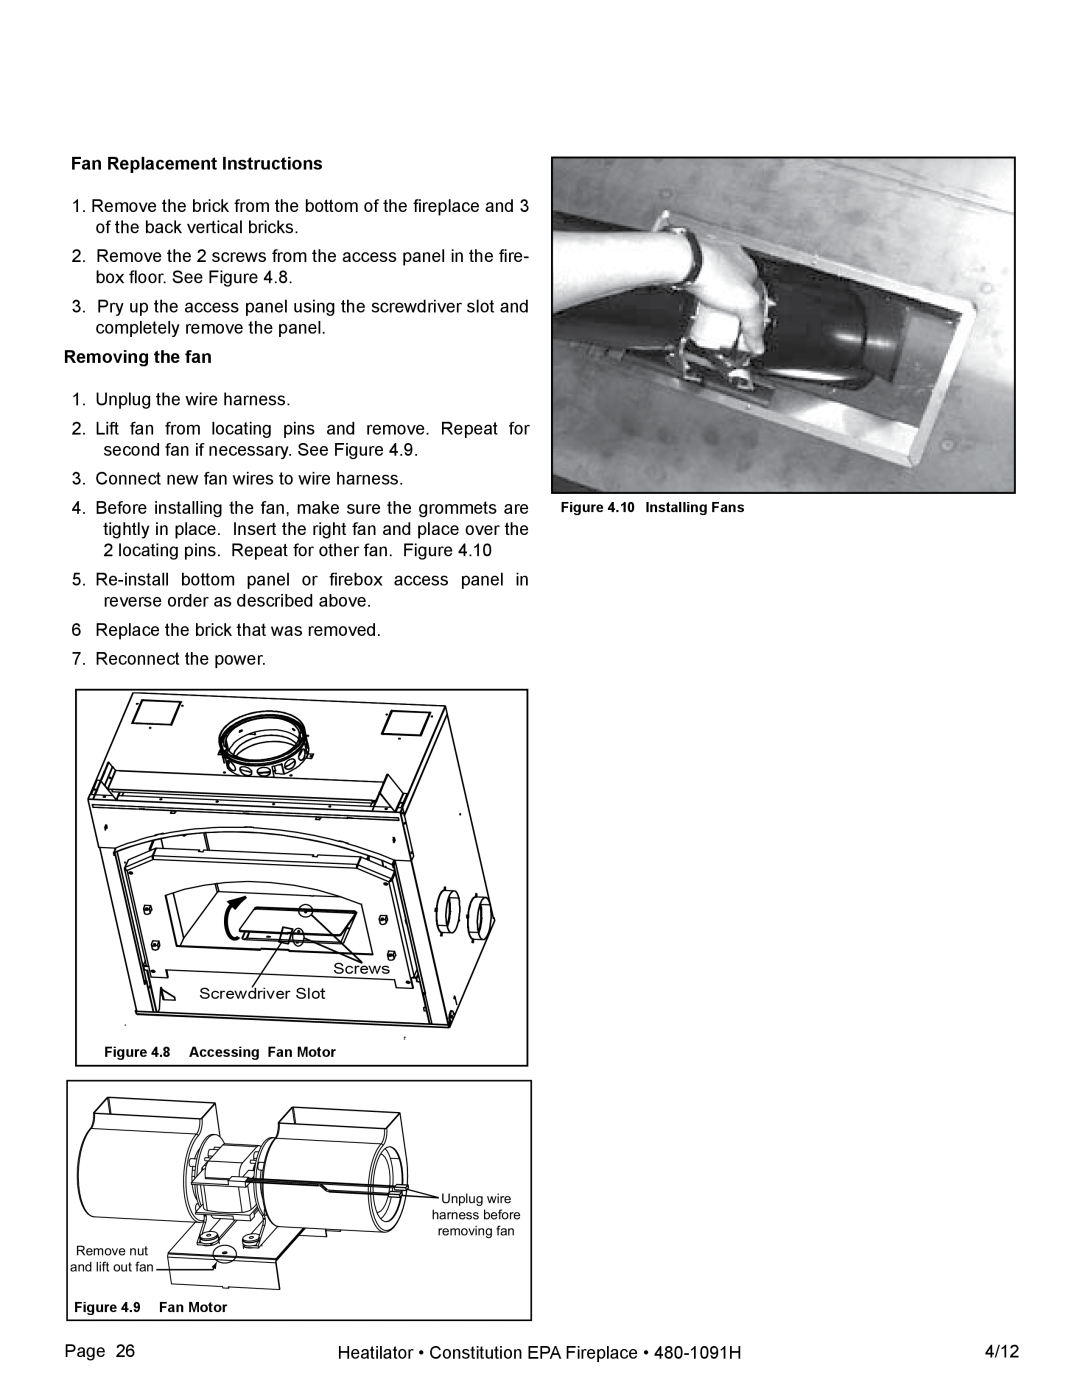 Heatiator C40 owner manual Fan Replacement Instructions, Removing the fan 